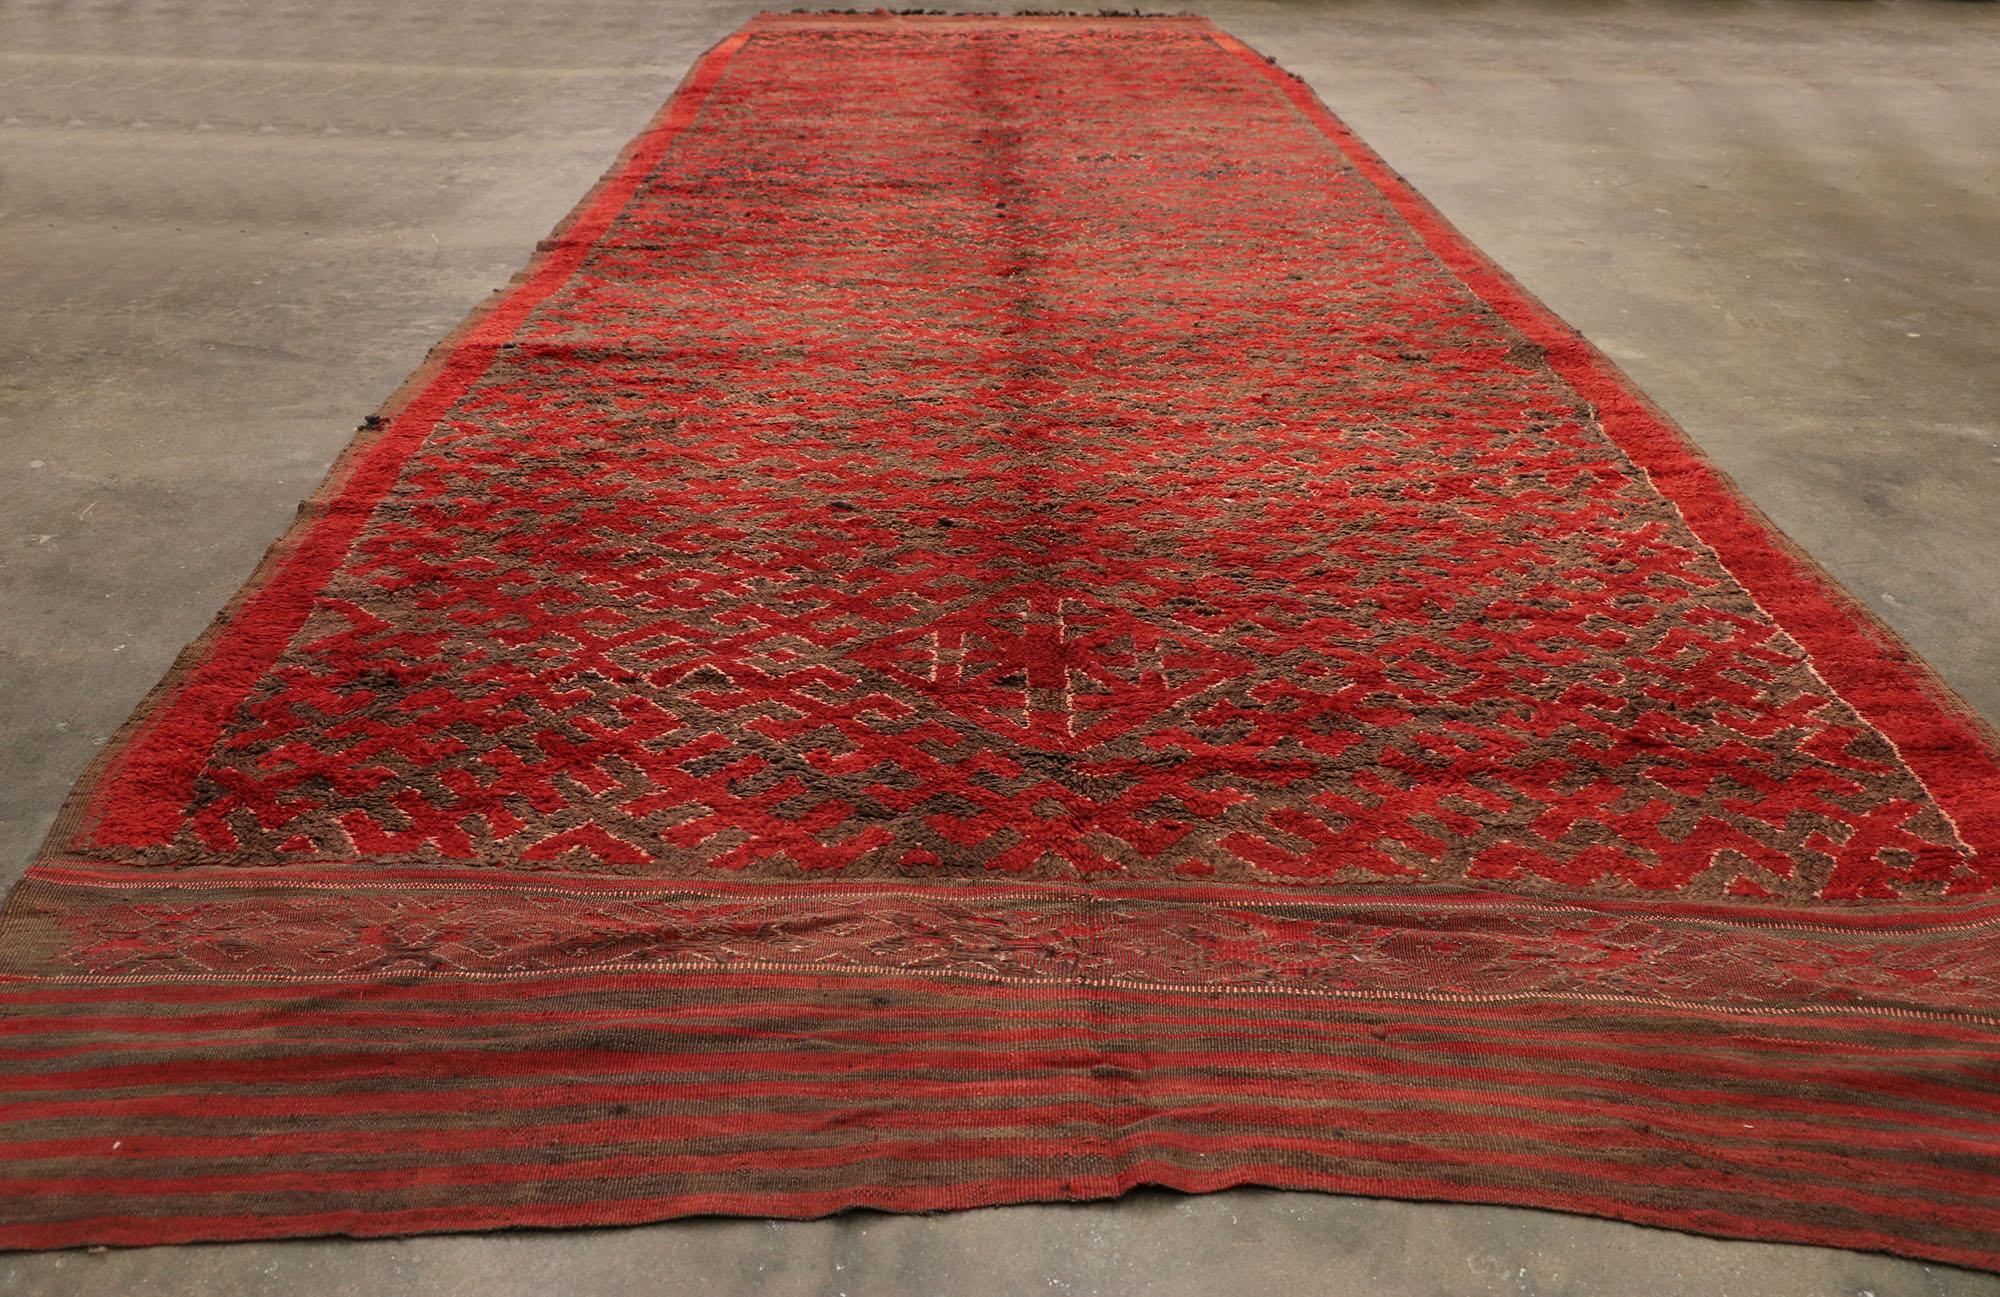 20ft Vintage Moroccan Rug, Midcentury Bohemian Meets Pacific Northwest Style For Sale 4